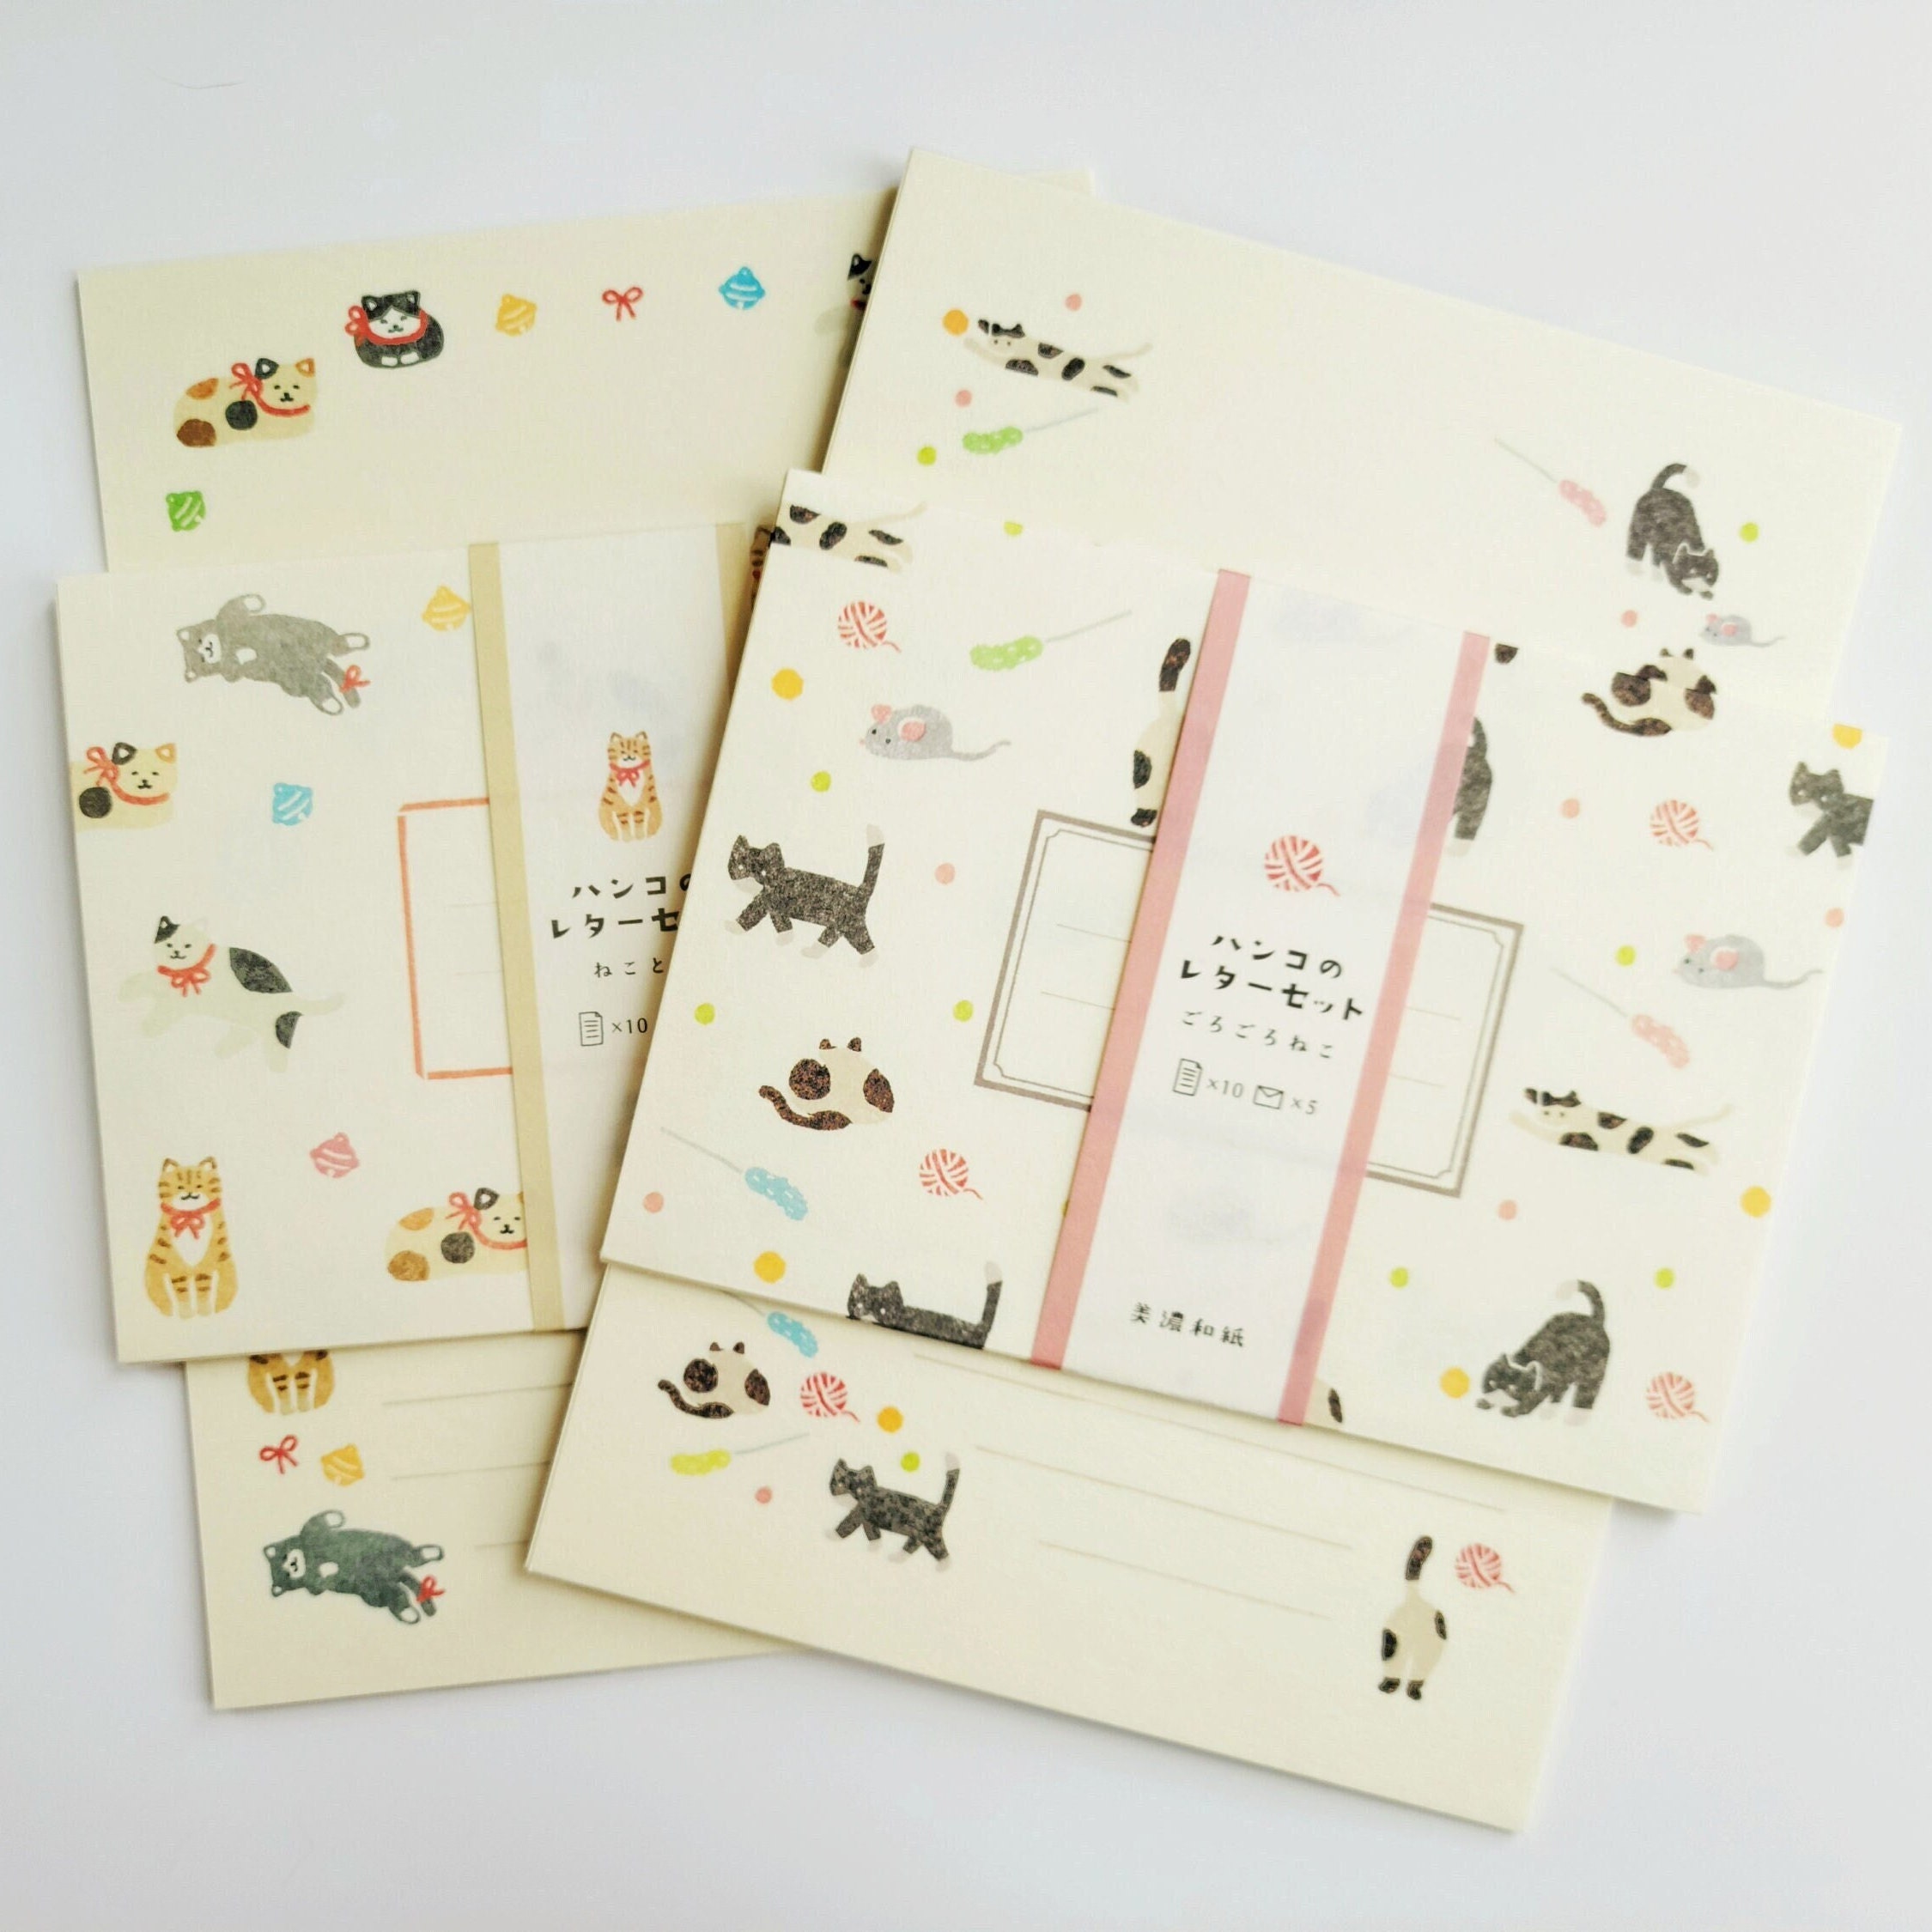 12 Unique & Cute Japanese Stationery Items (with demos)! 🇯🇵